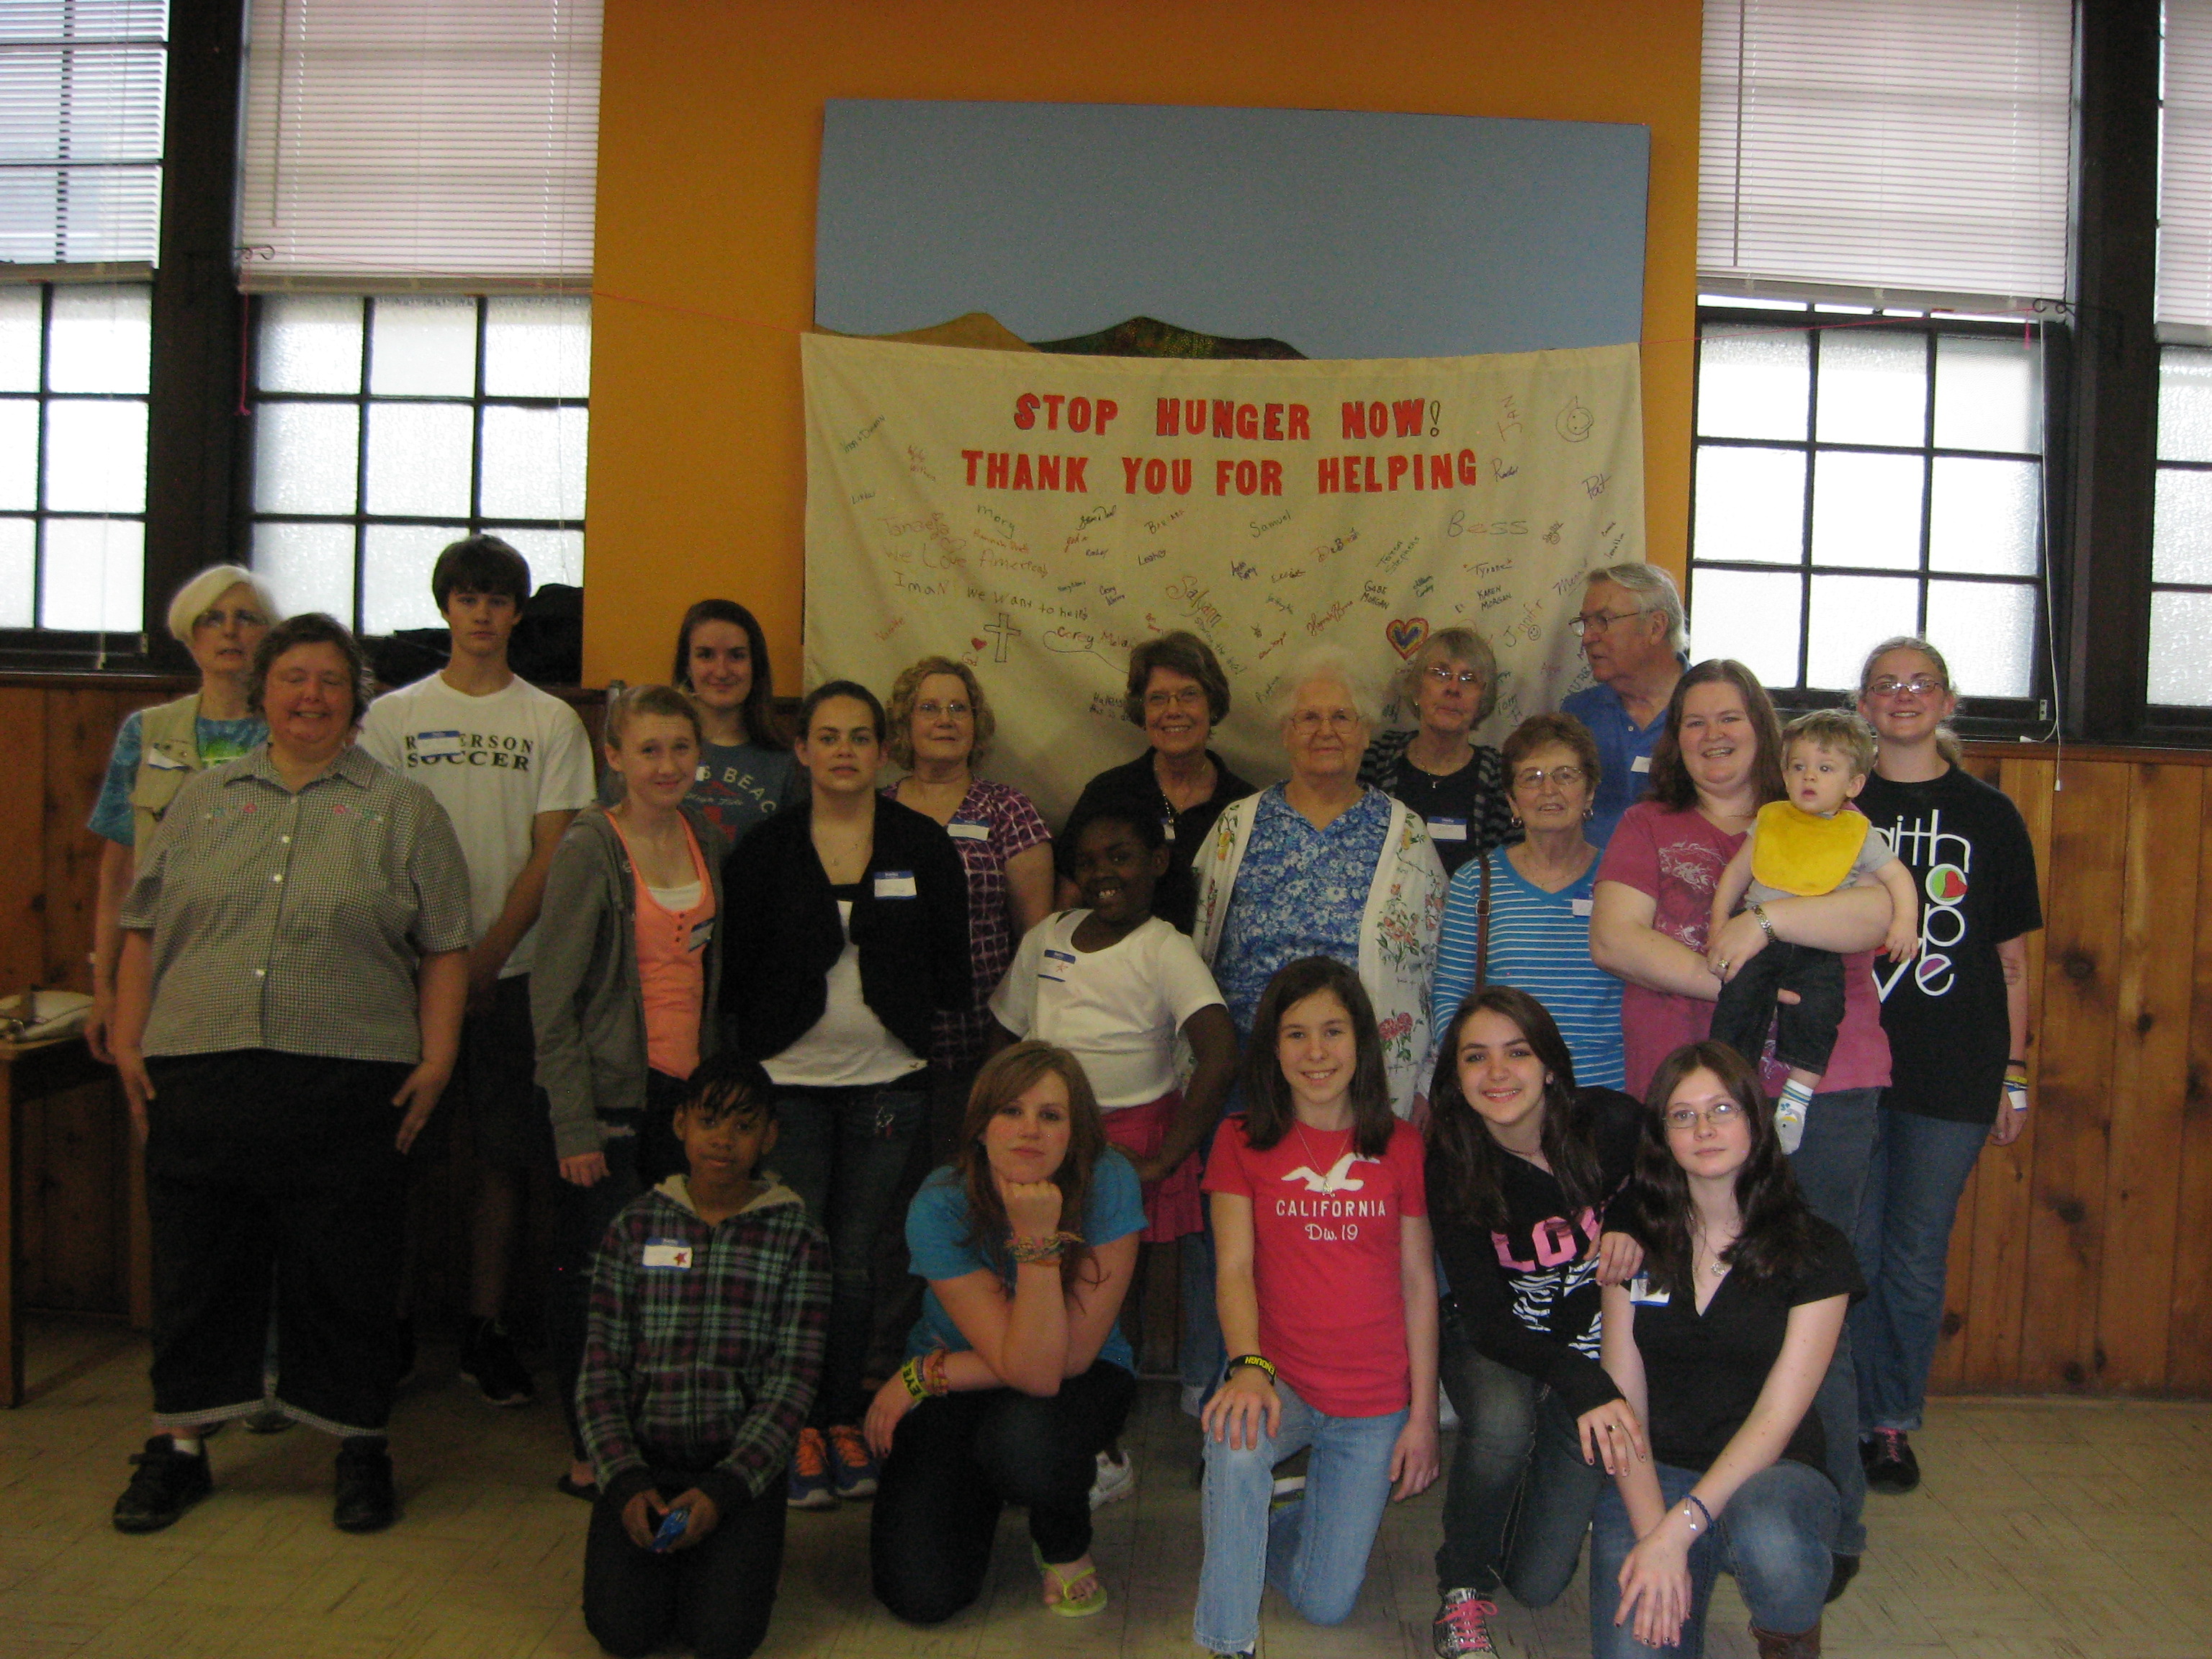 BUMC participates in STOP HUNGER NOW